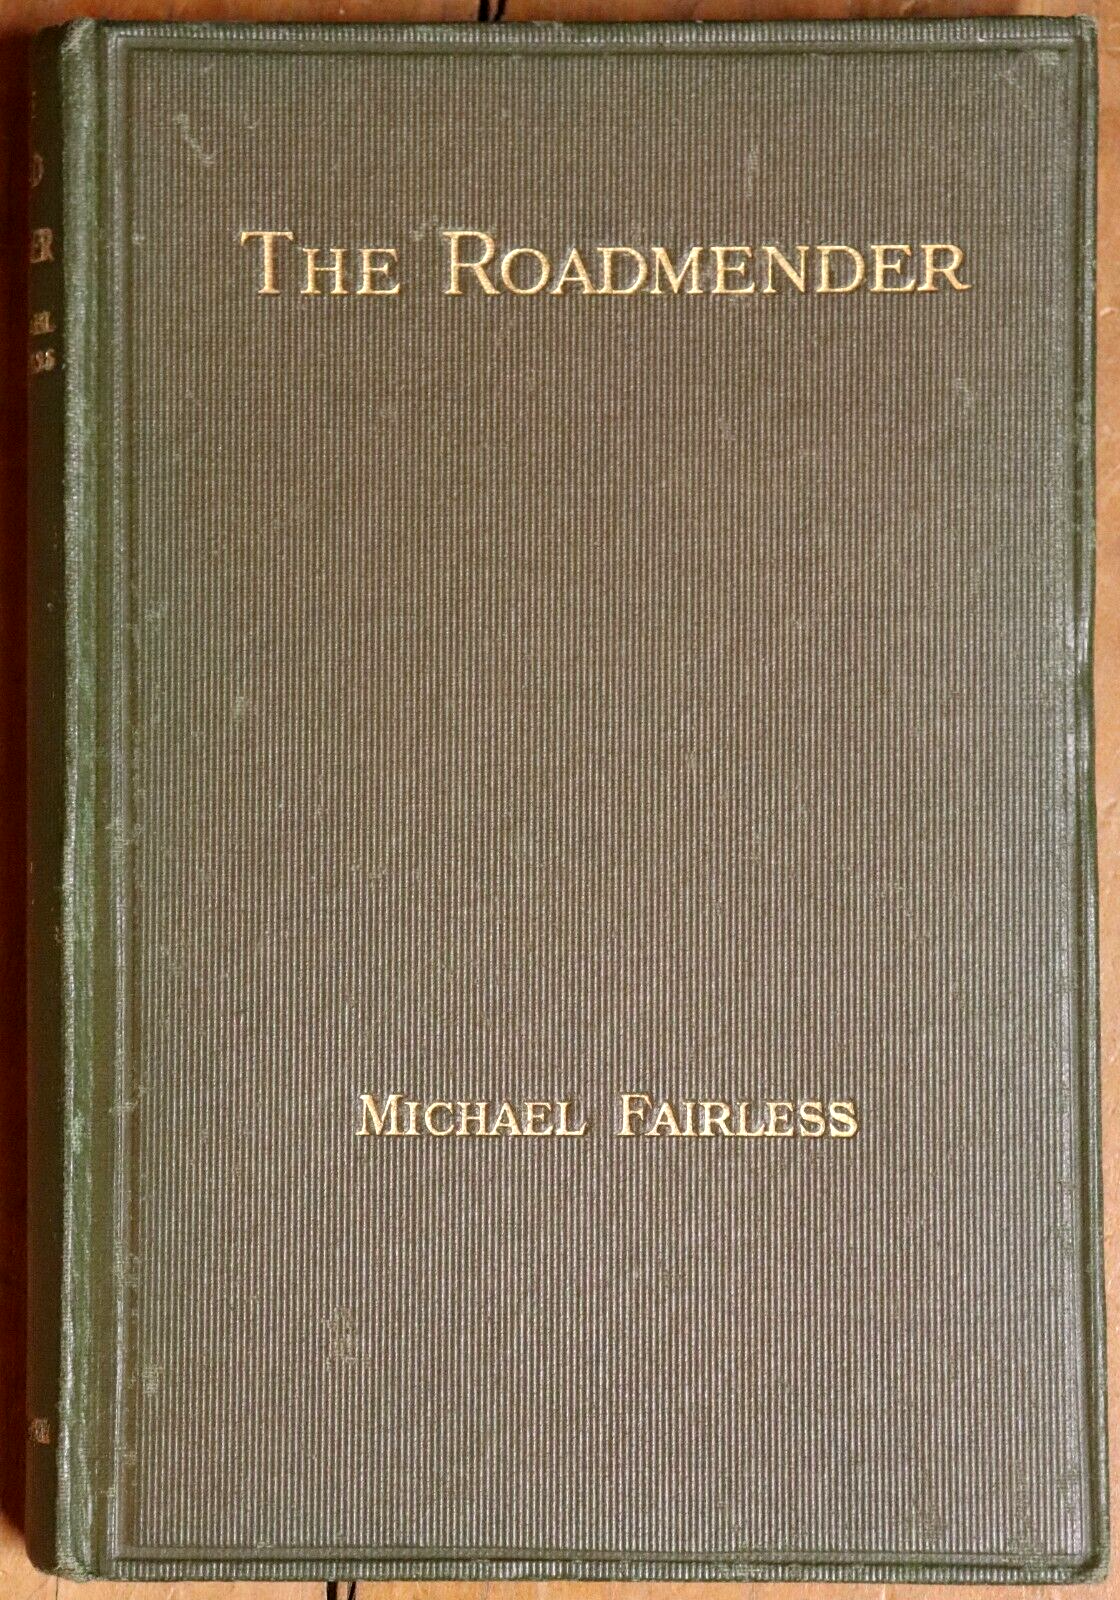 The Roadmender by Michael Fairless - 1912 - Antique Book